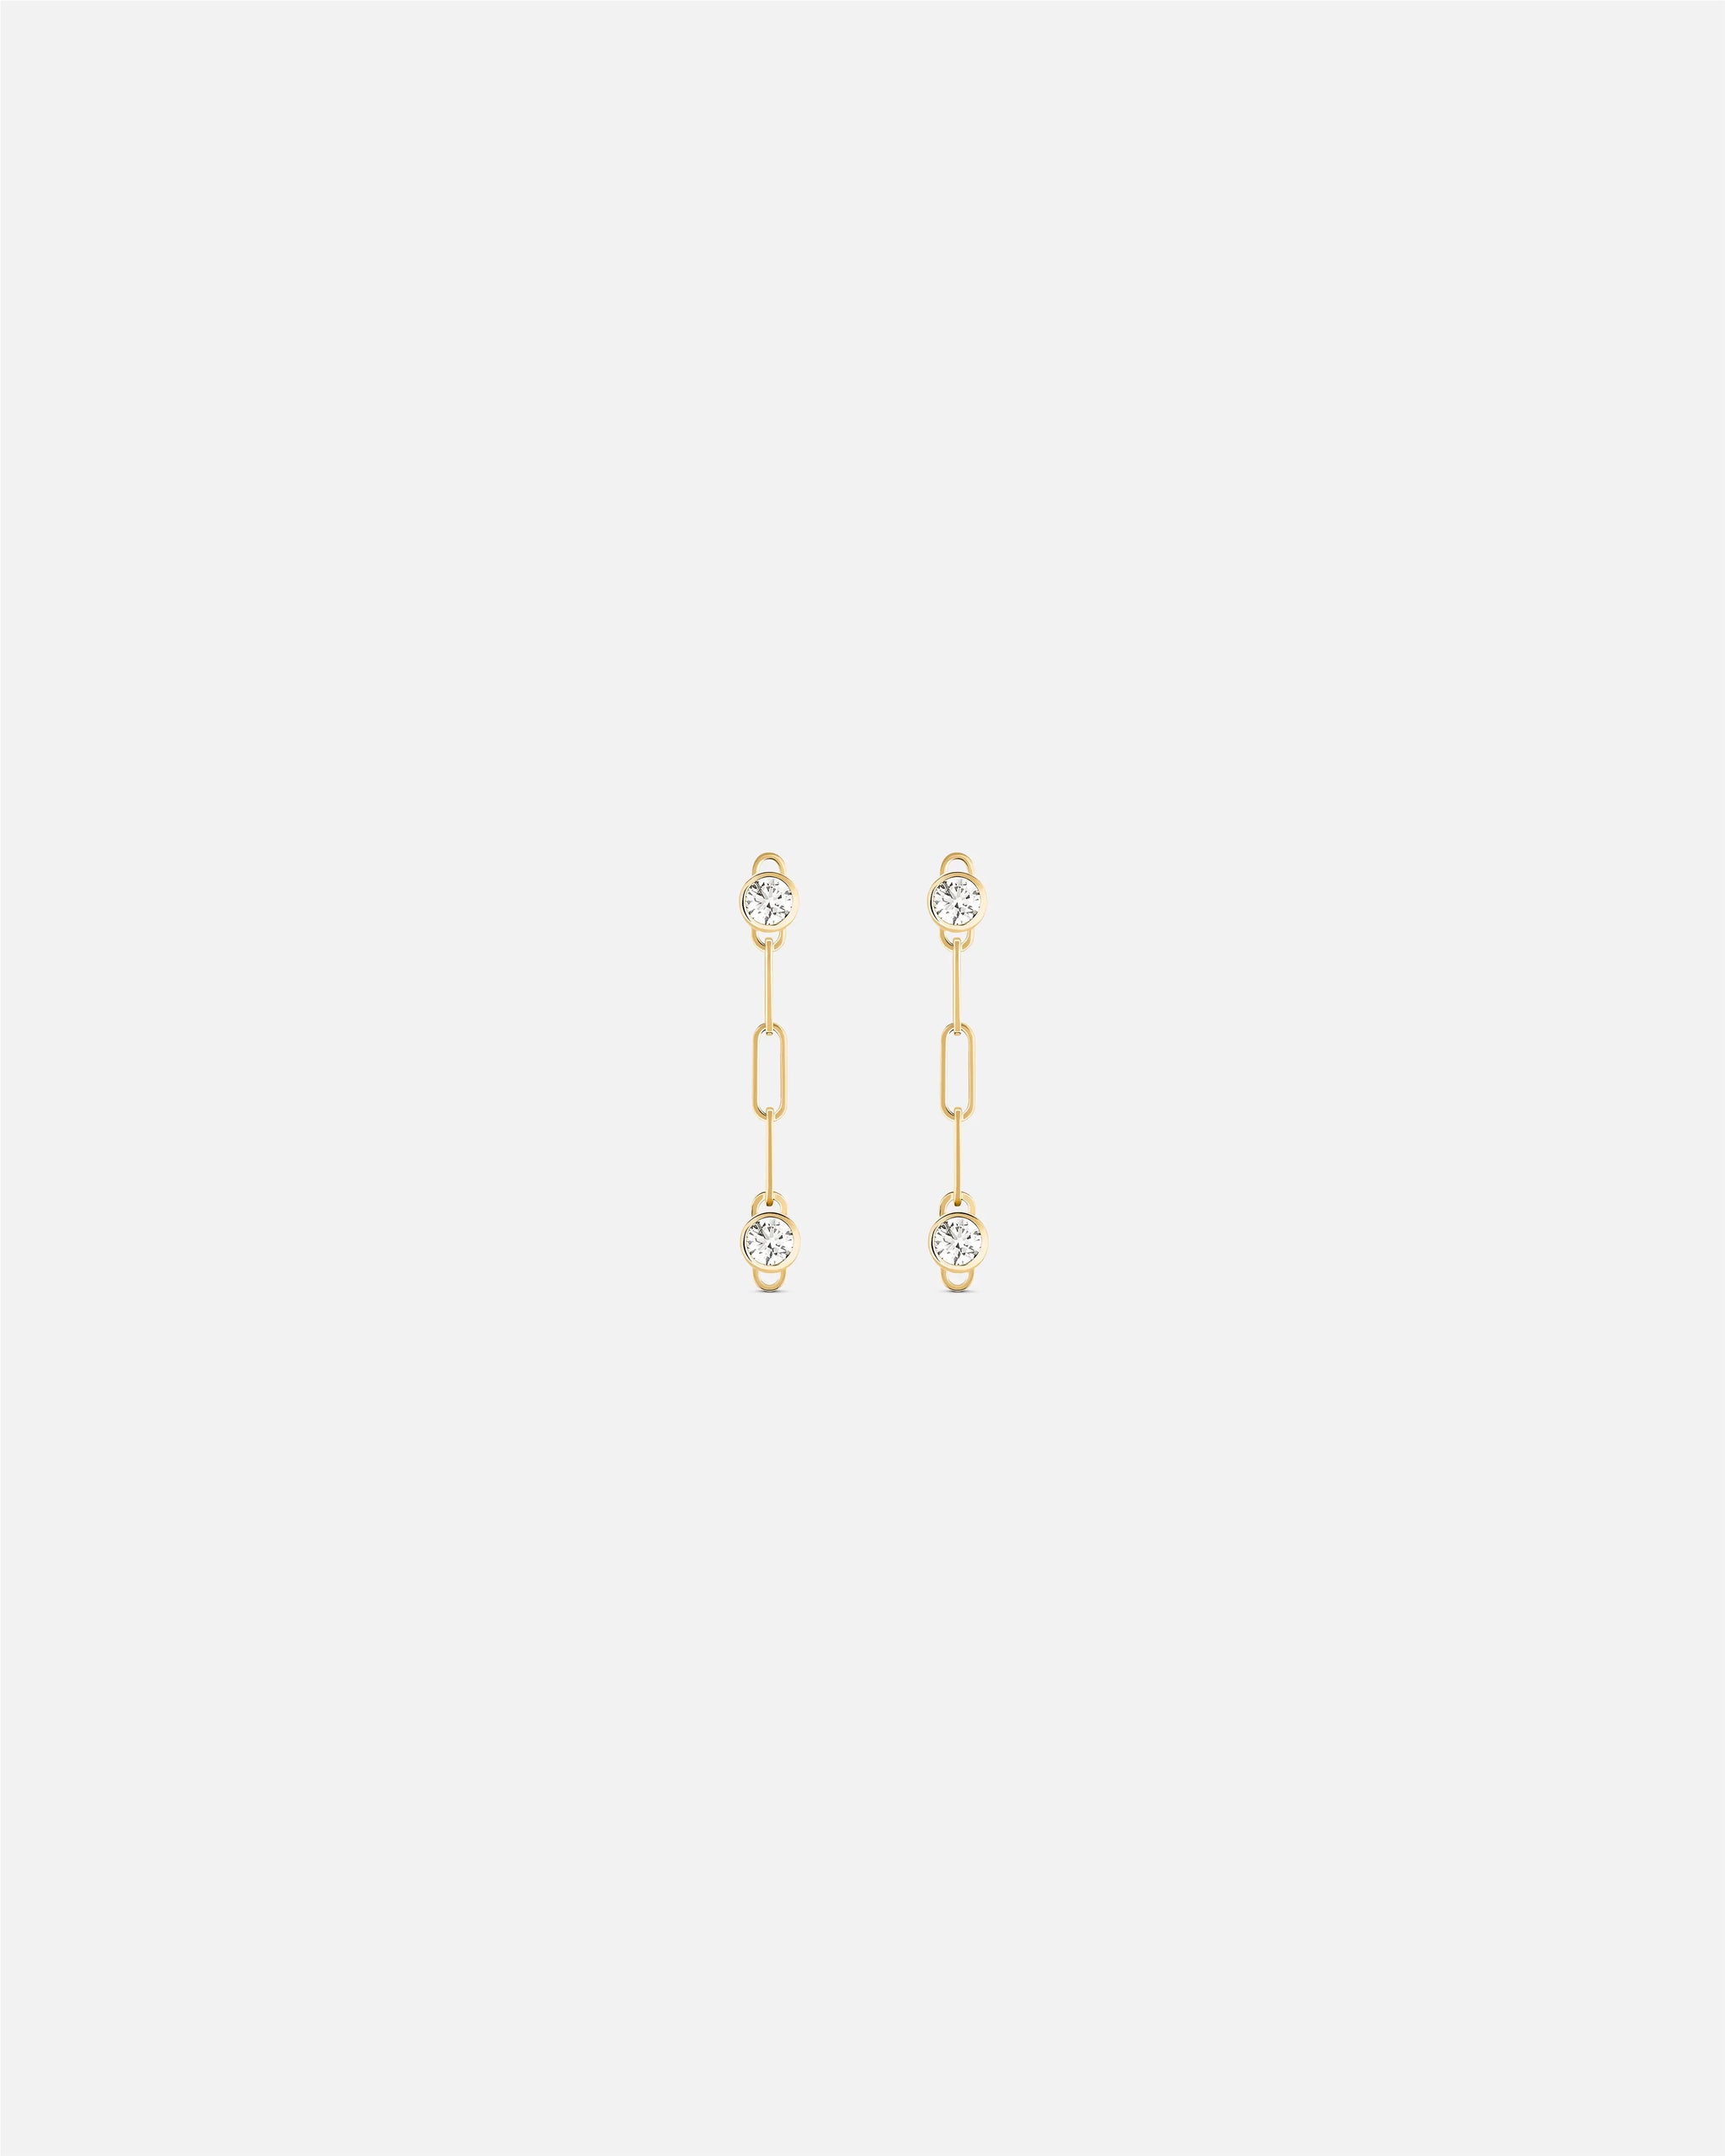 Round Duo PM Classics Earrings in Yellow Gold - 1 - Nouvel Heritage